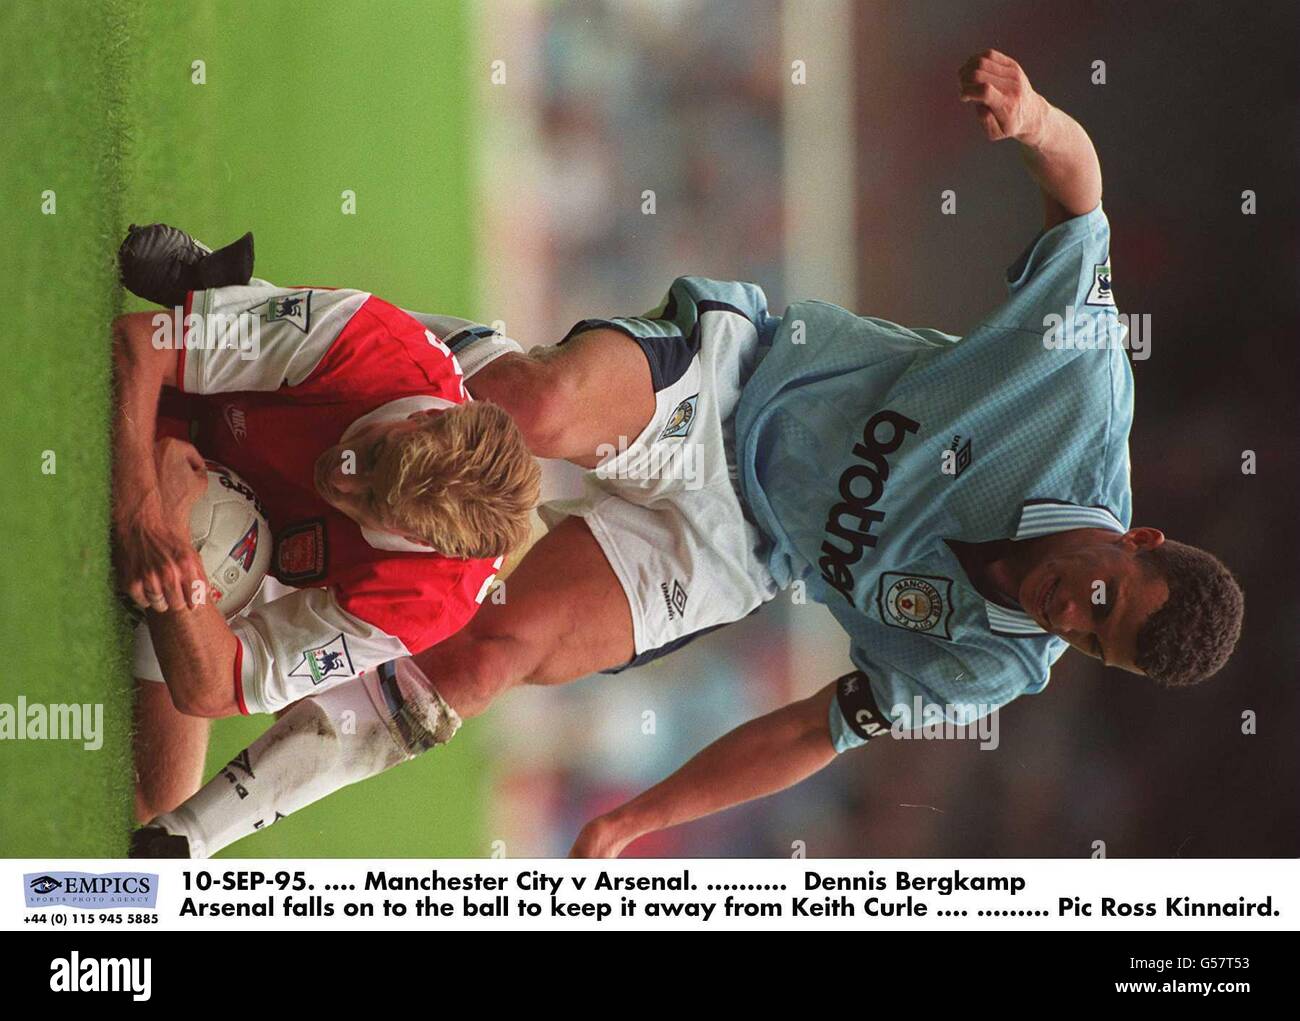 10-SEP-95. Manchester City v Arsenal. Dennis Bergkamp Arsenal falls on to the ball to keep it away from Keith Curle Stock Photo